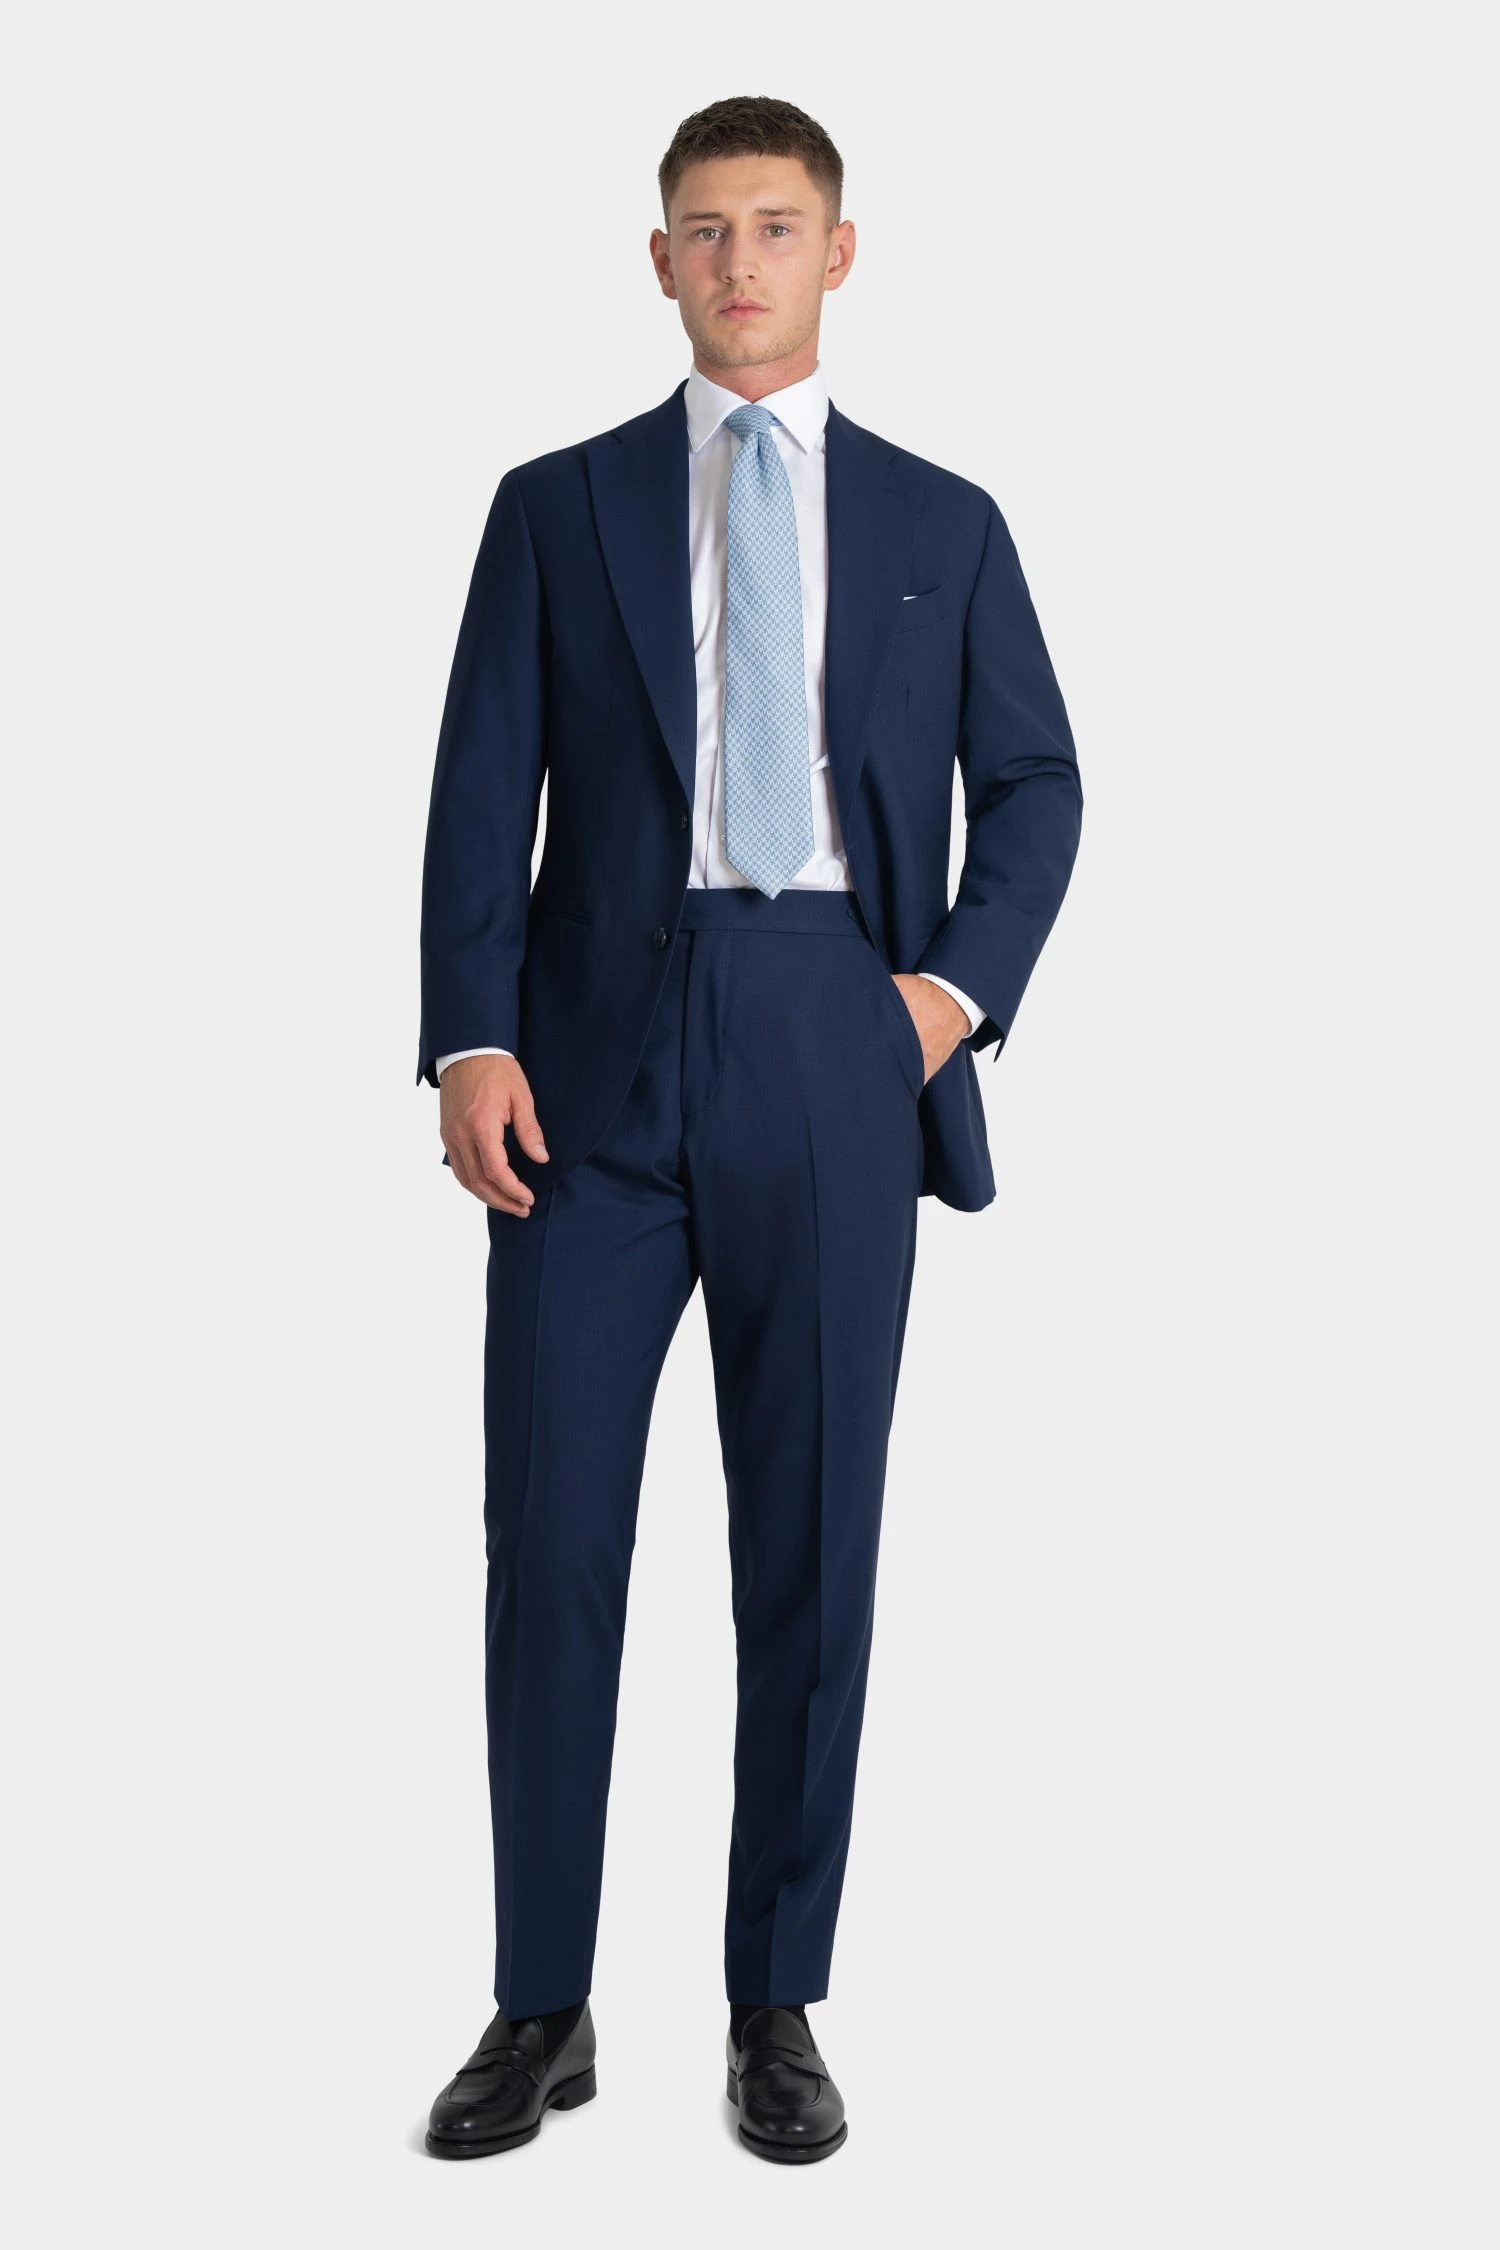 navy melange suit in twistair fabric, made to measure tailored by Mond